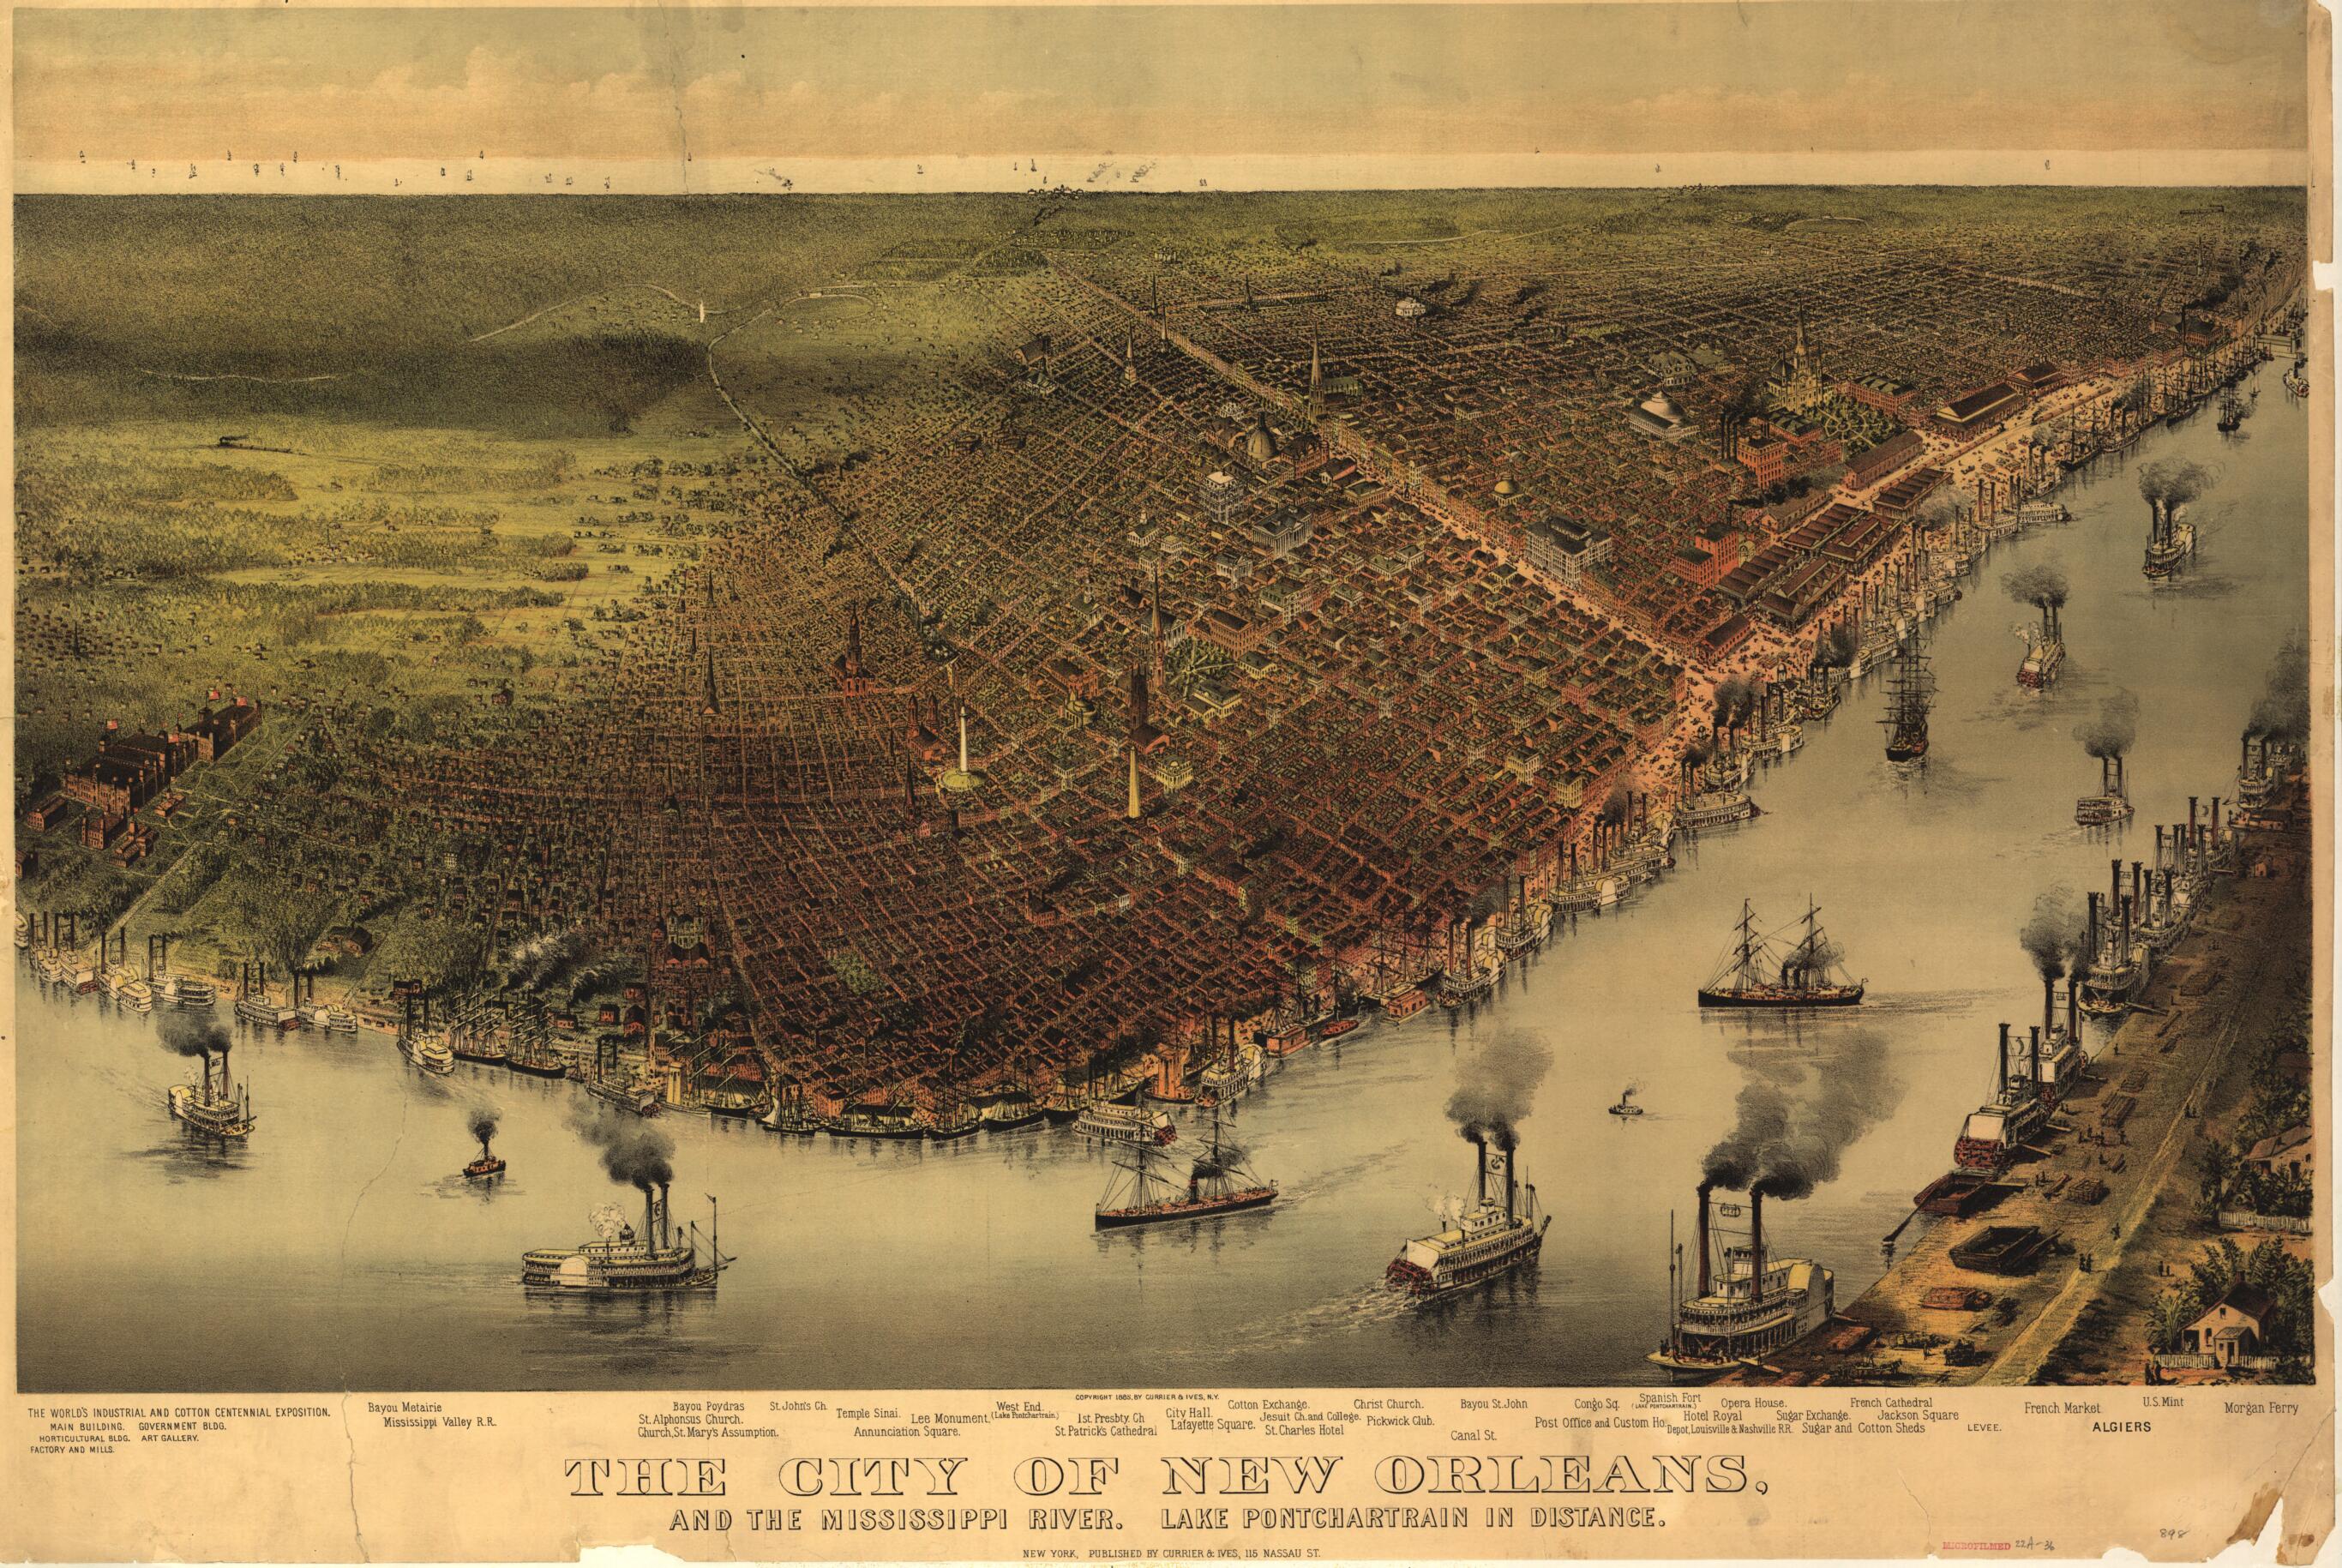 This old map of The City of New Orleans, and the Mississippi River Lake Pontchartrain In Distance from 1885 was created by  Currier &amp; Ives in 1885